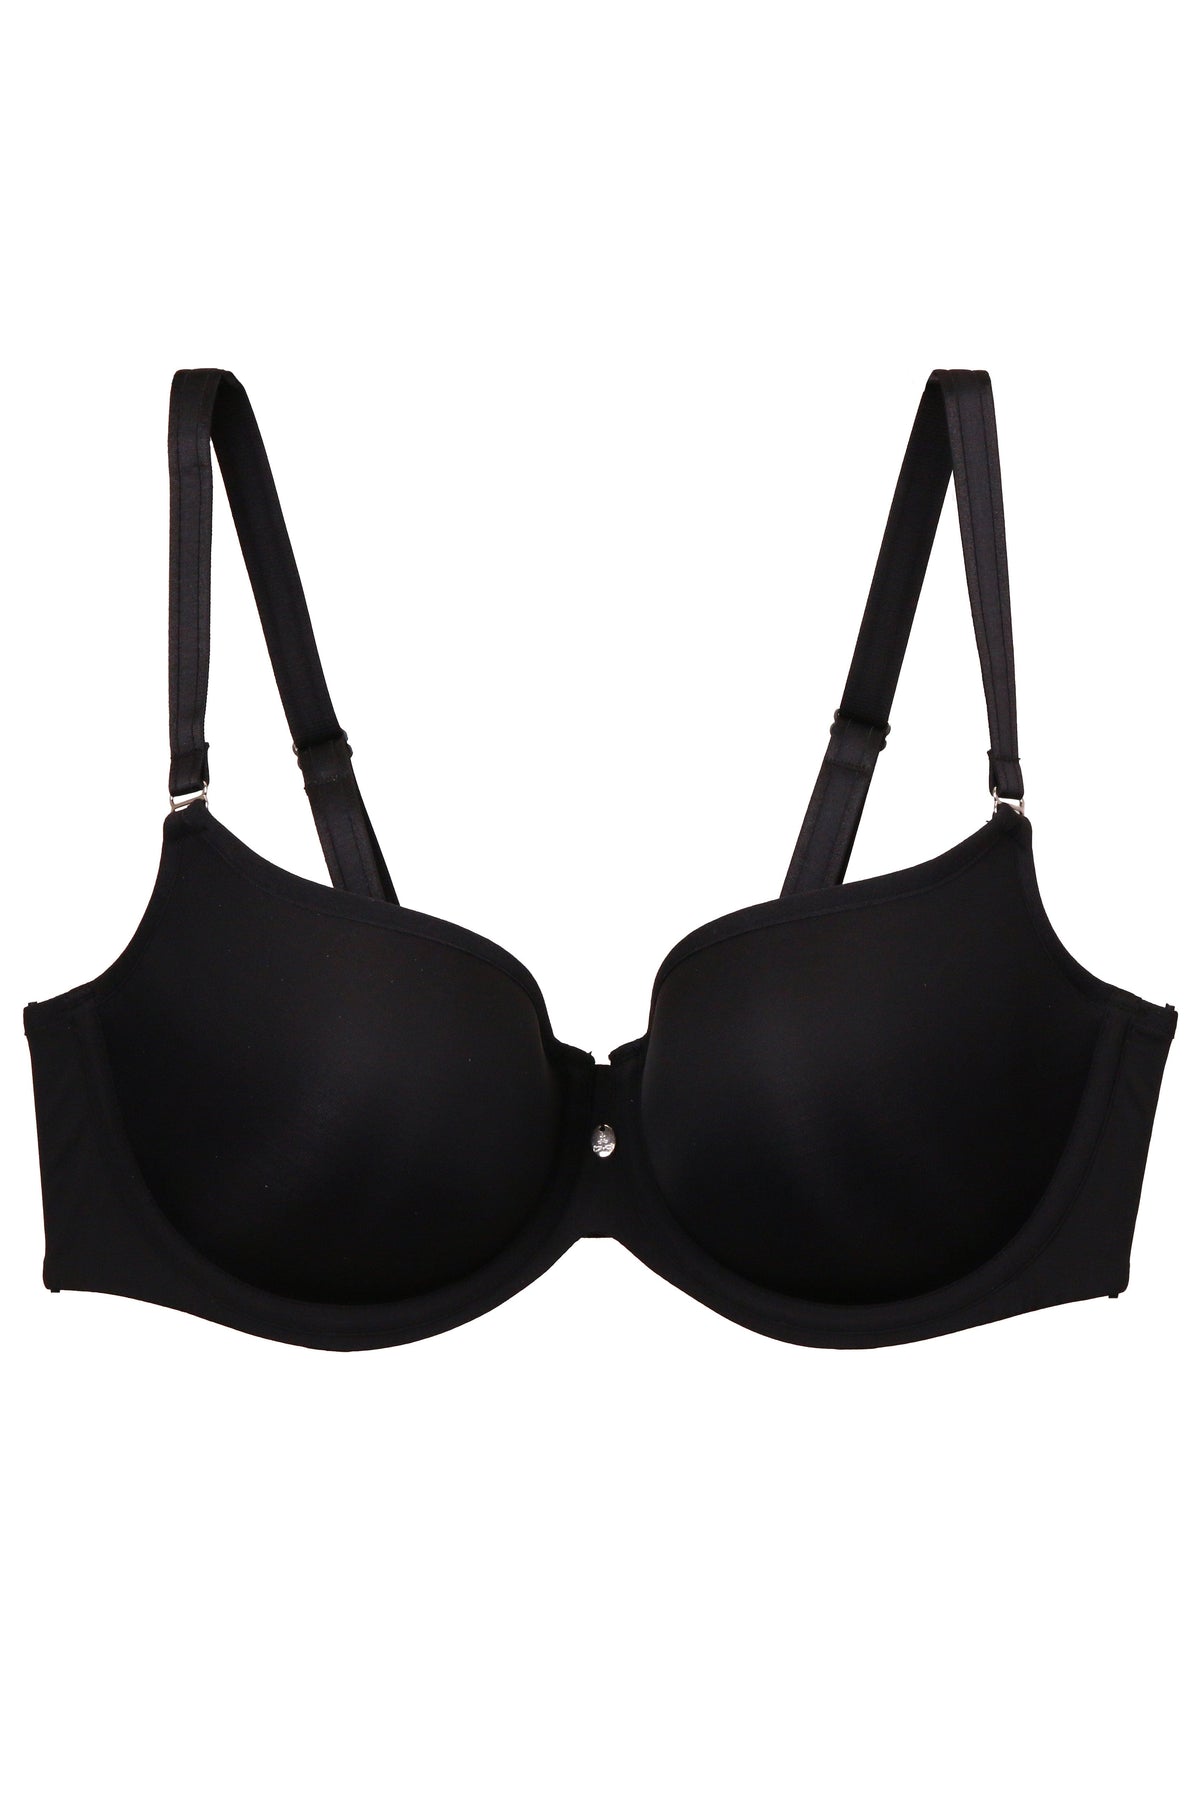 Curvy Couture Lingerie Tulip Smooth Pushup Bra - Black